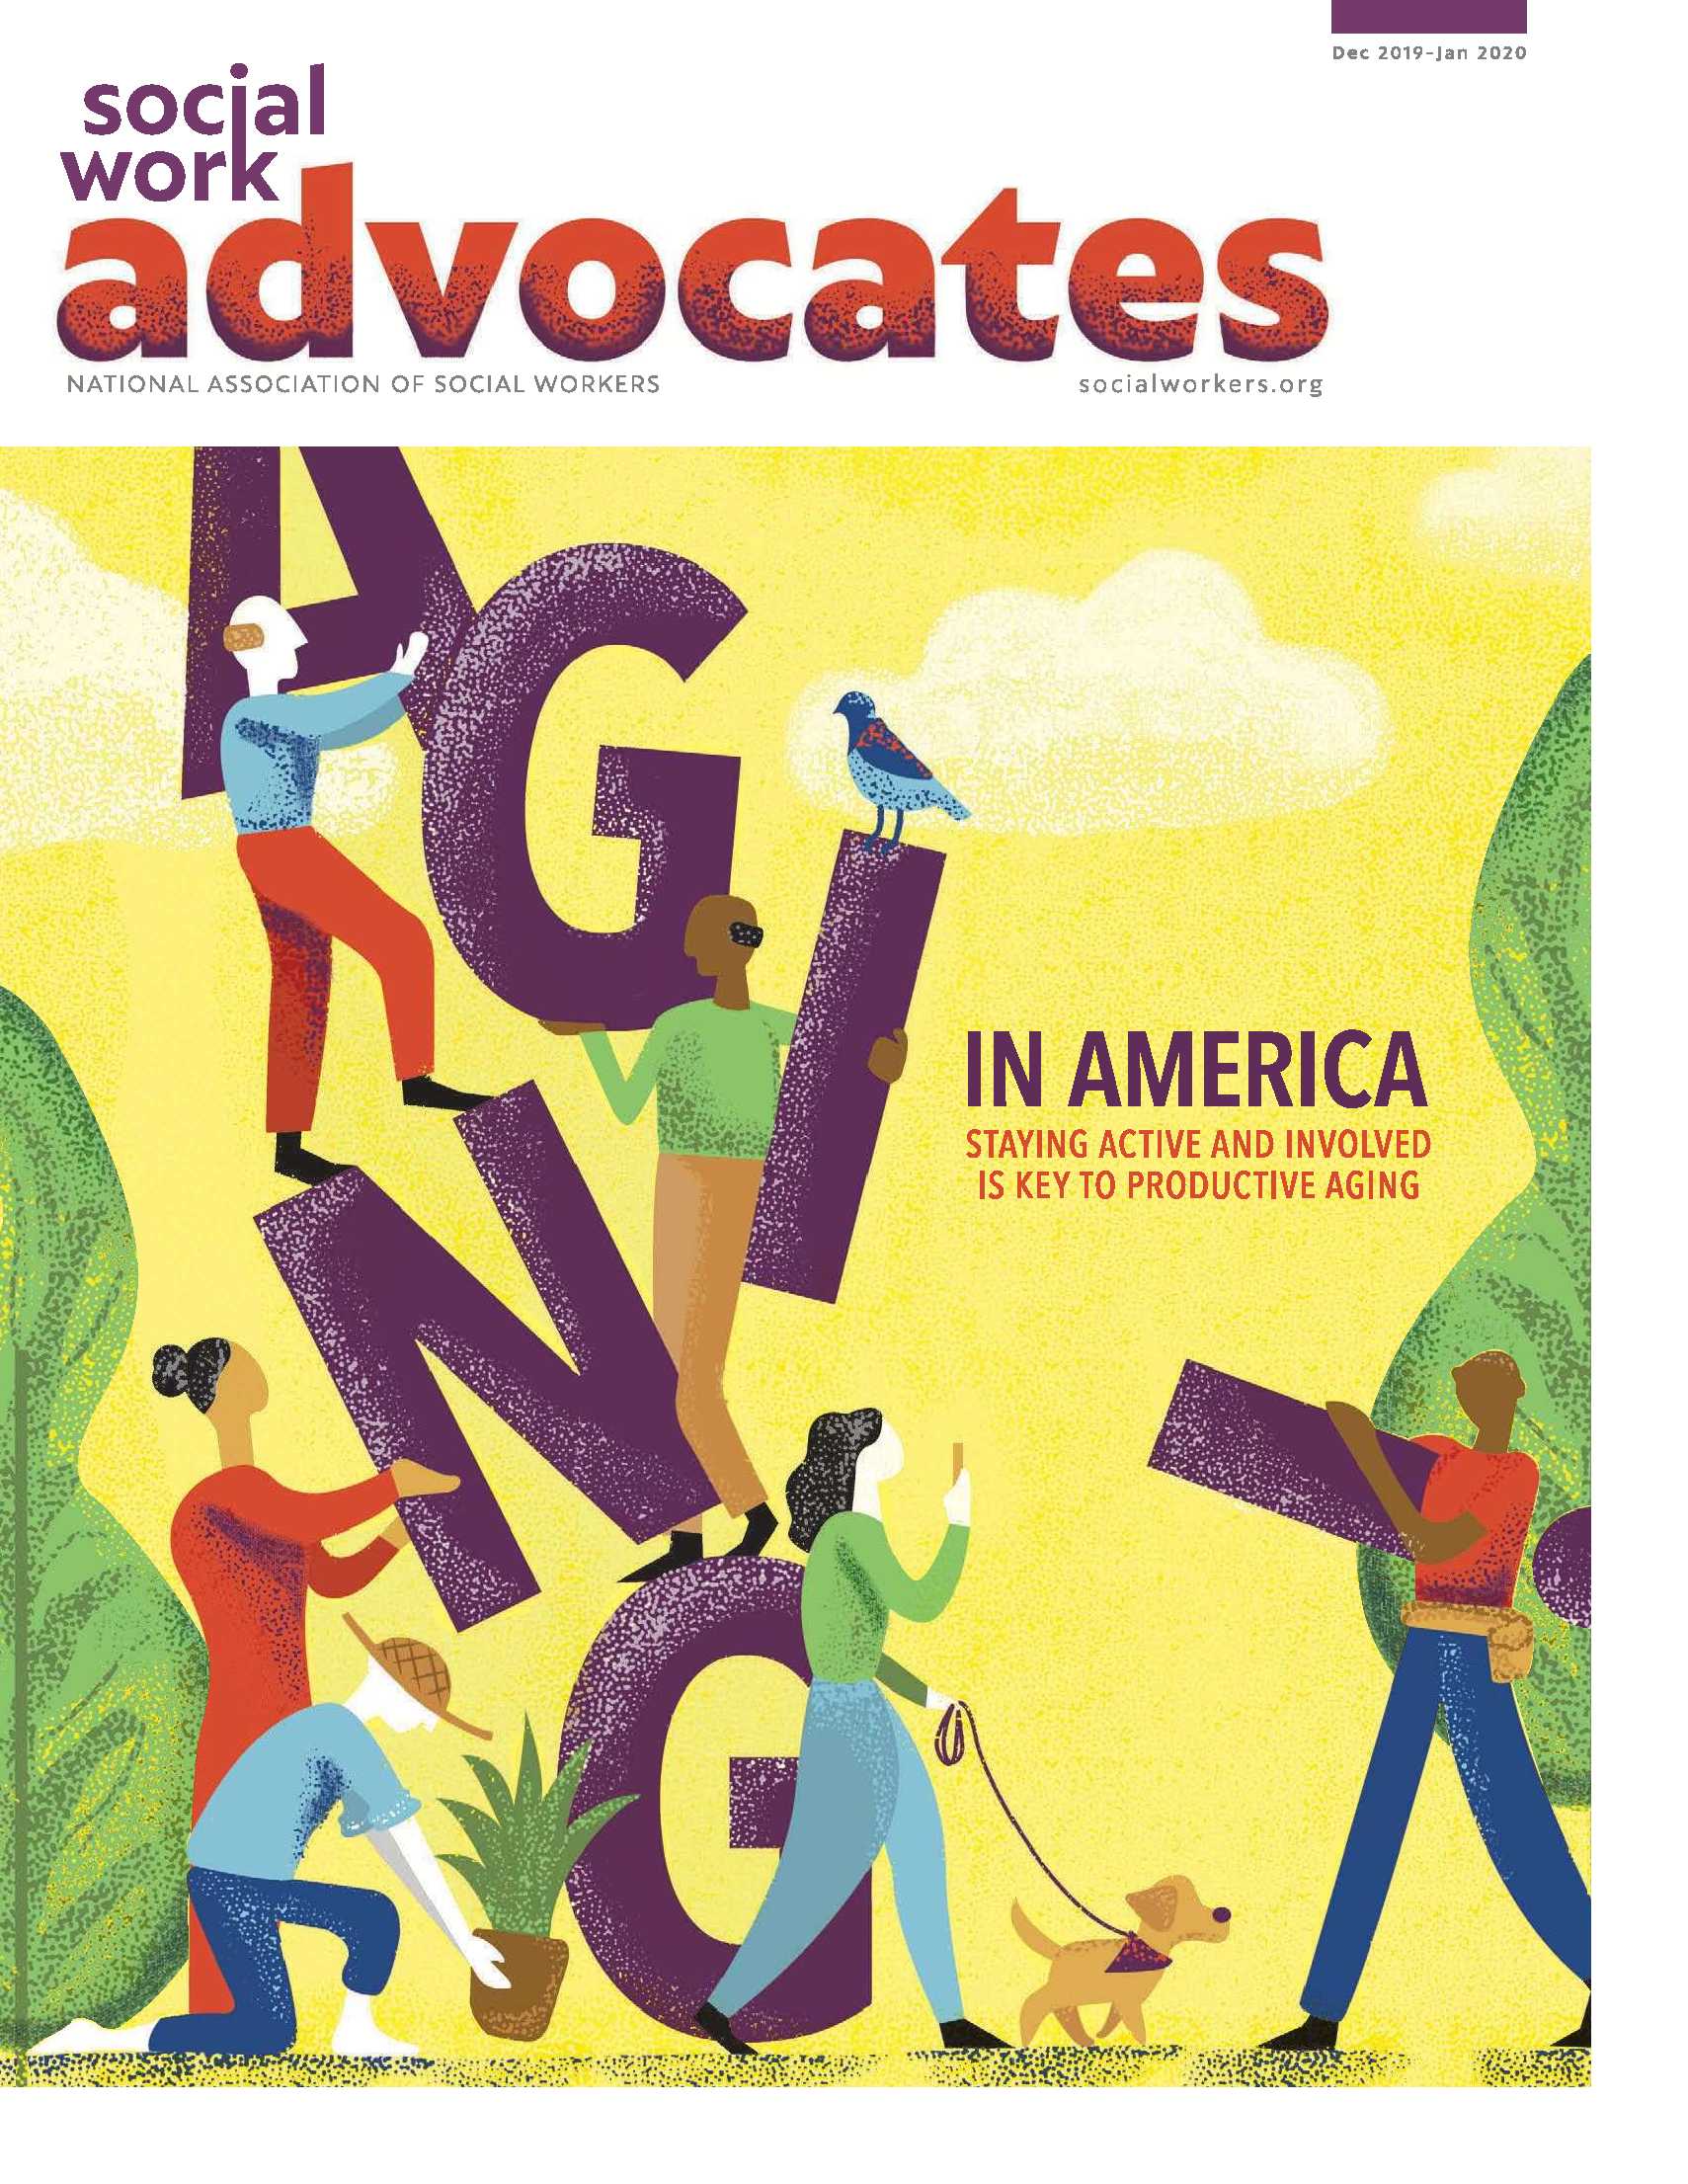 The December 2019 – January 2020 Issue of Social Work Advocates Magazine Covers Productive Aging